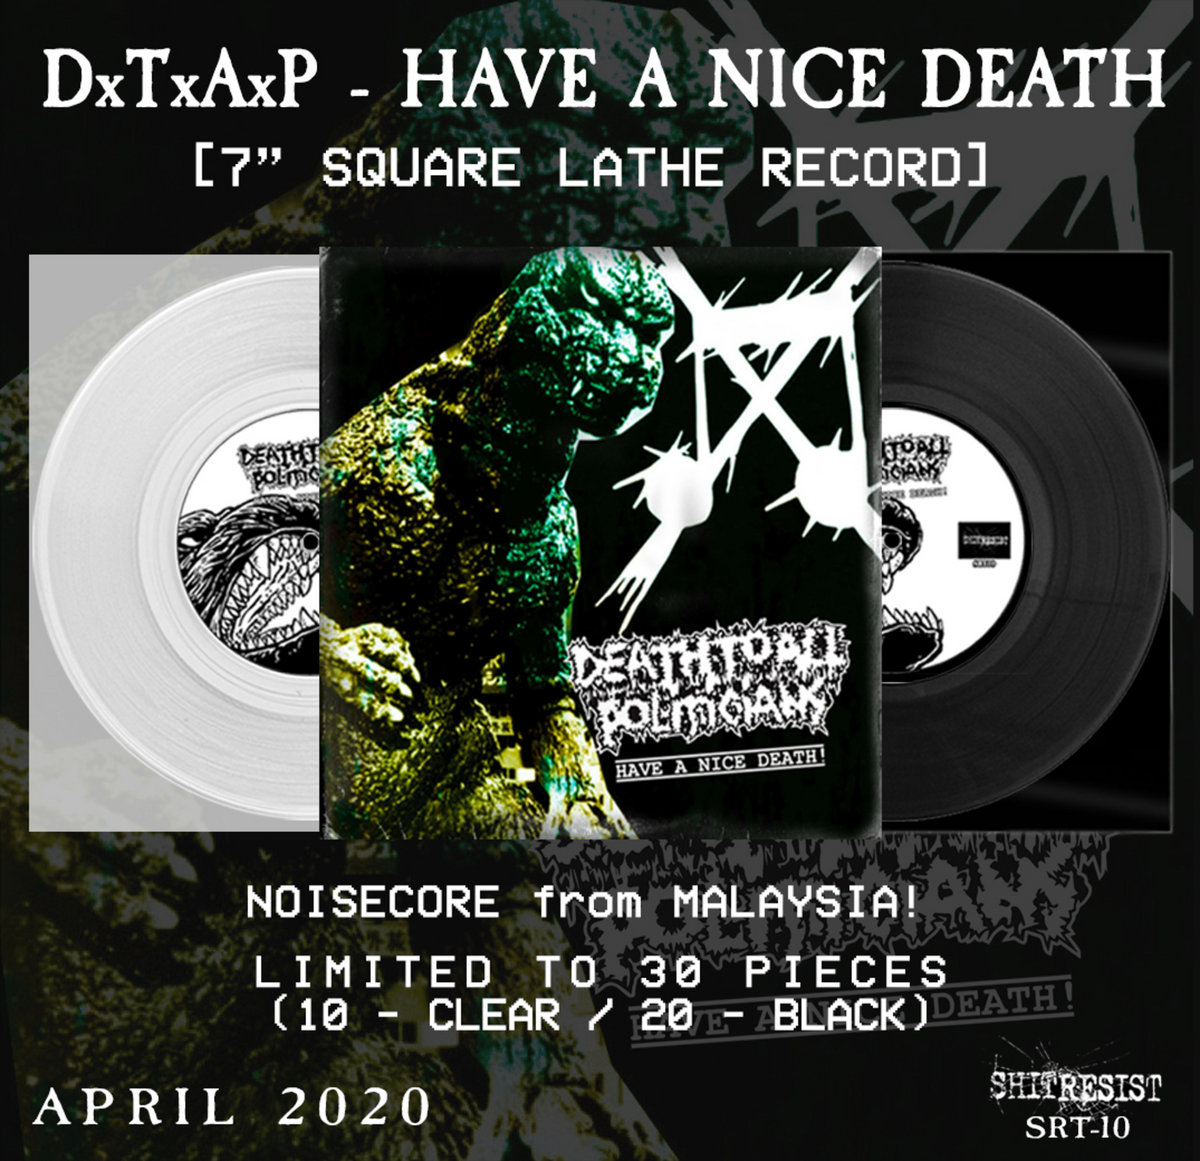 have a nice death release date